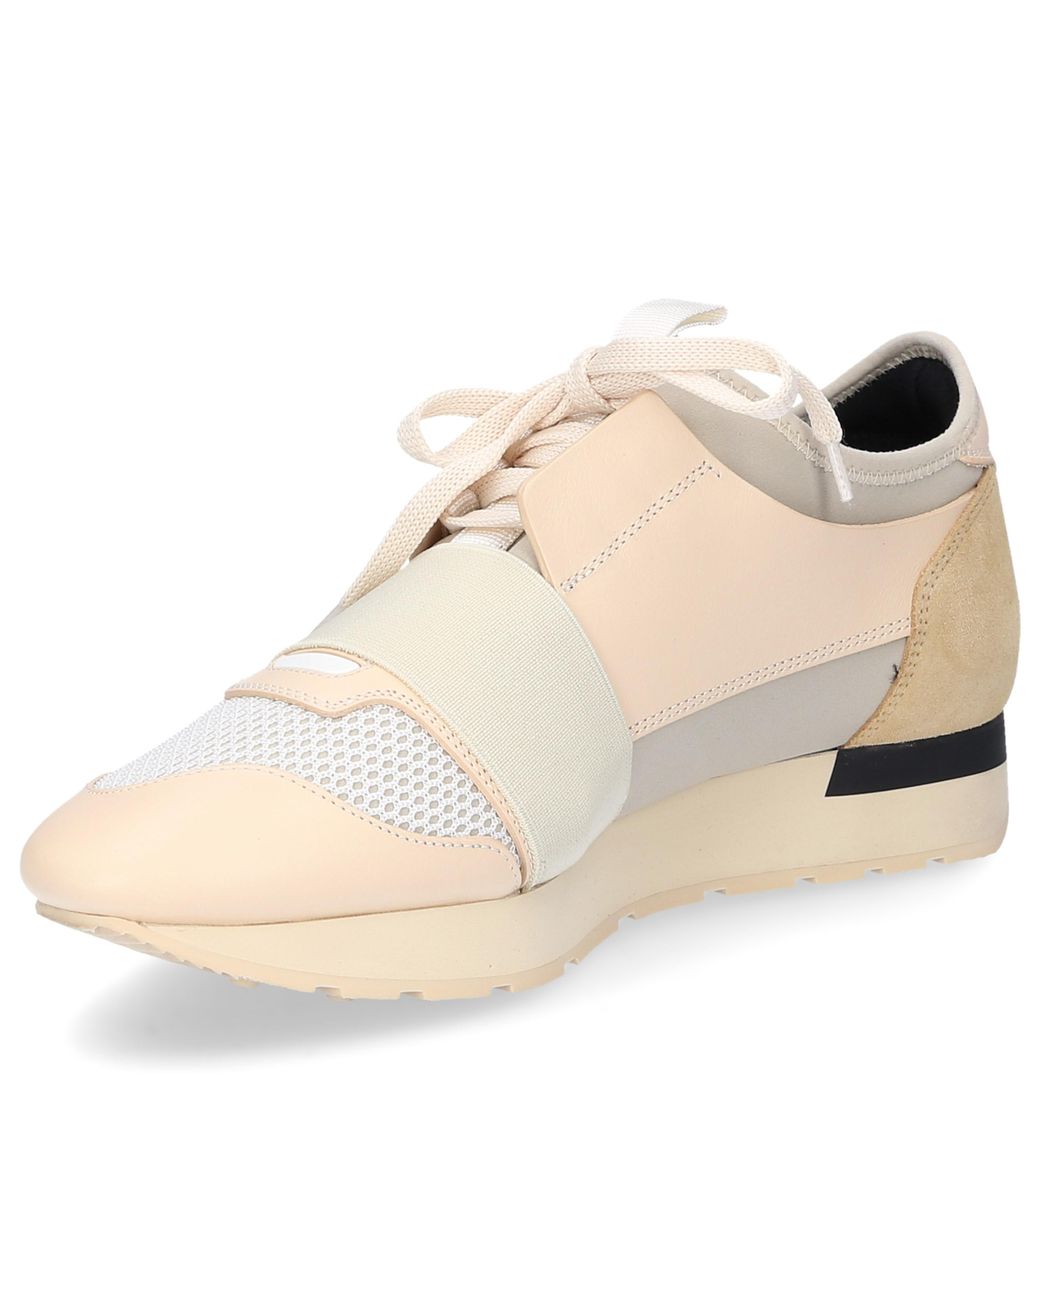 Balenciaga Race Runner Leather, Suede, Mesh And Neoprene Sneakers in  Natural | Lyst